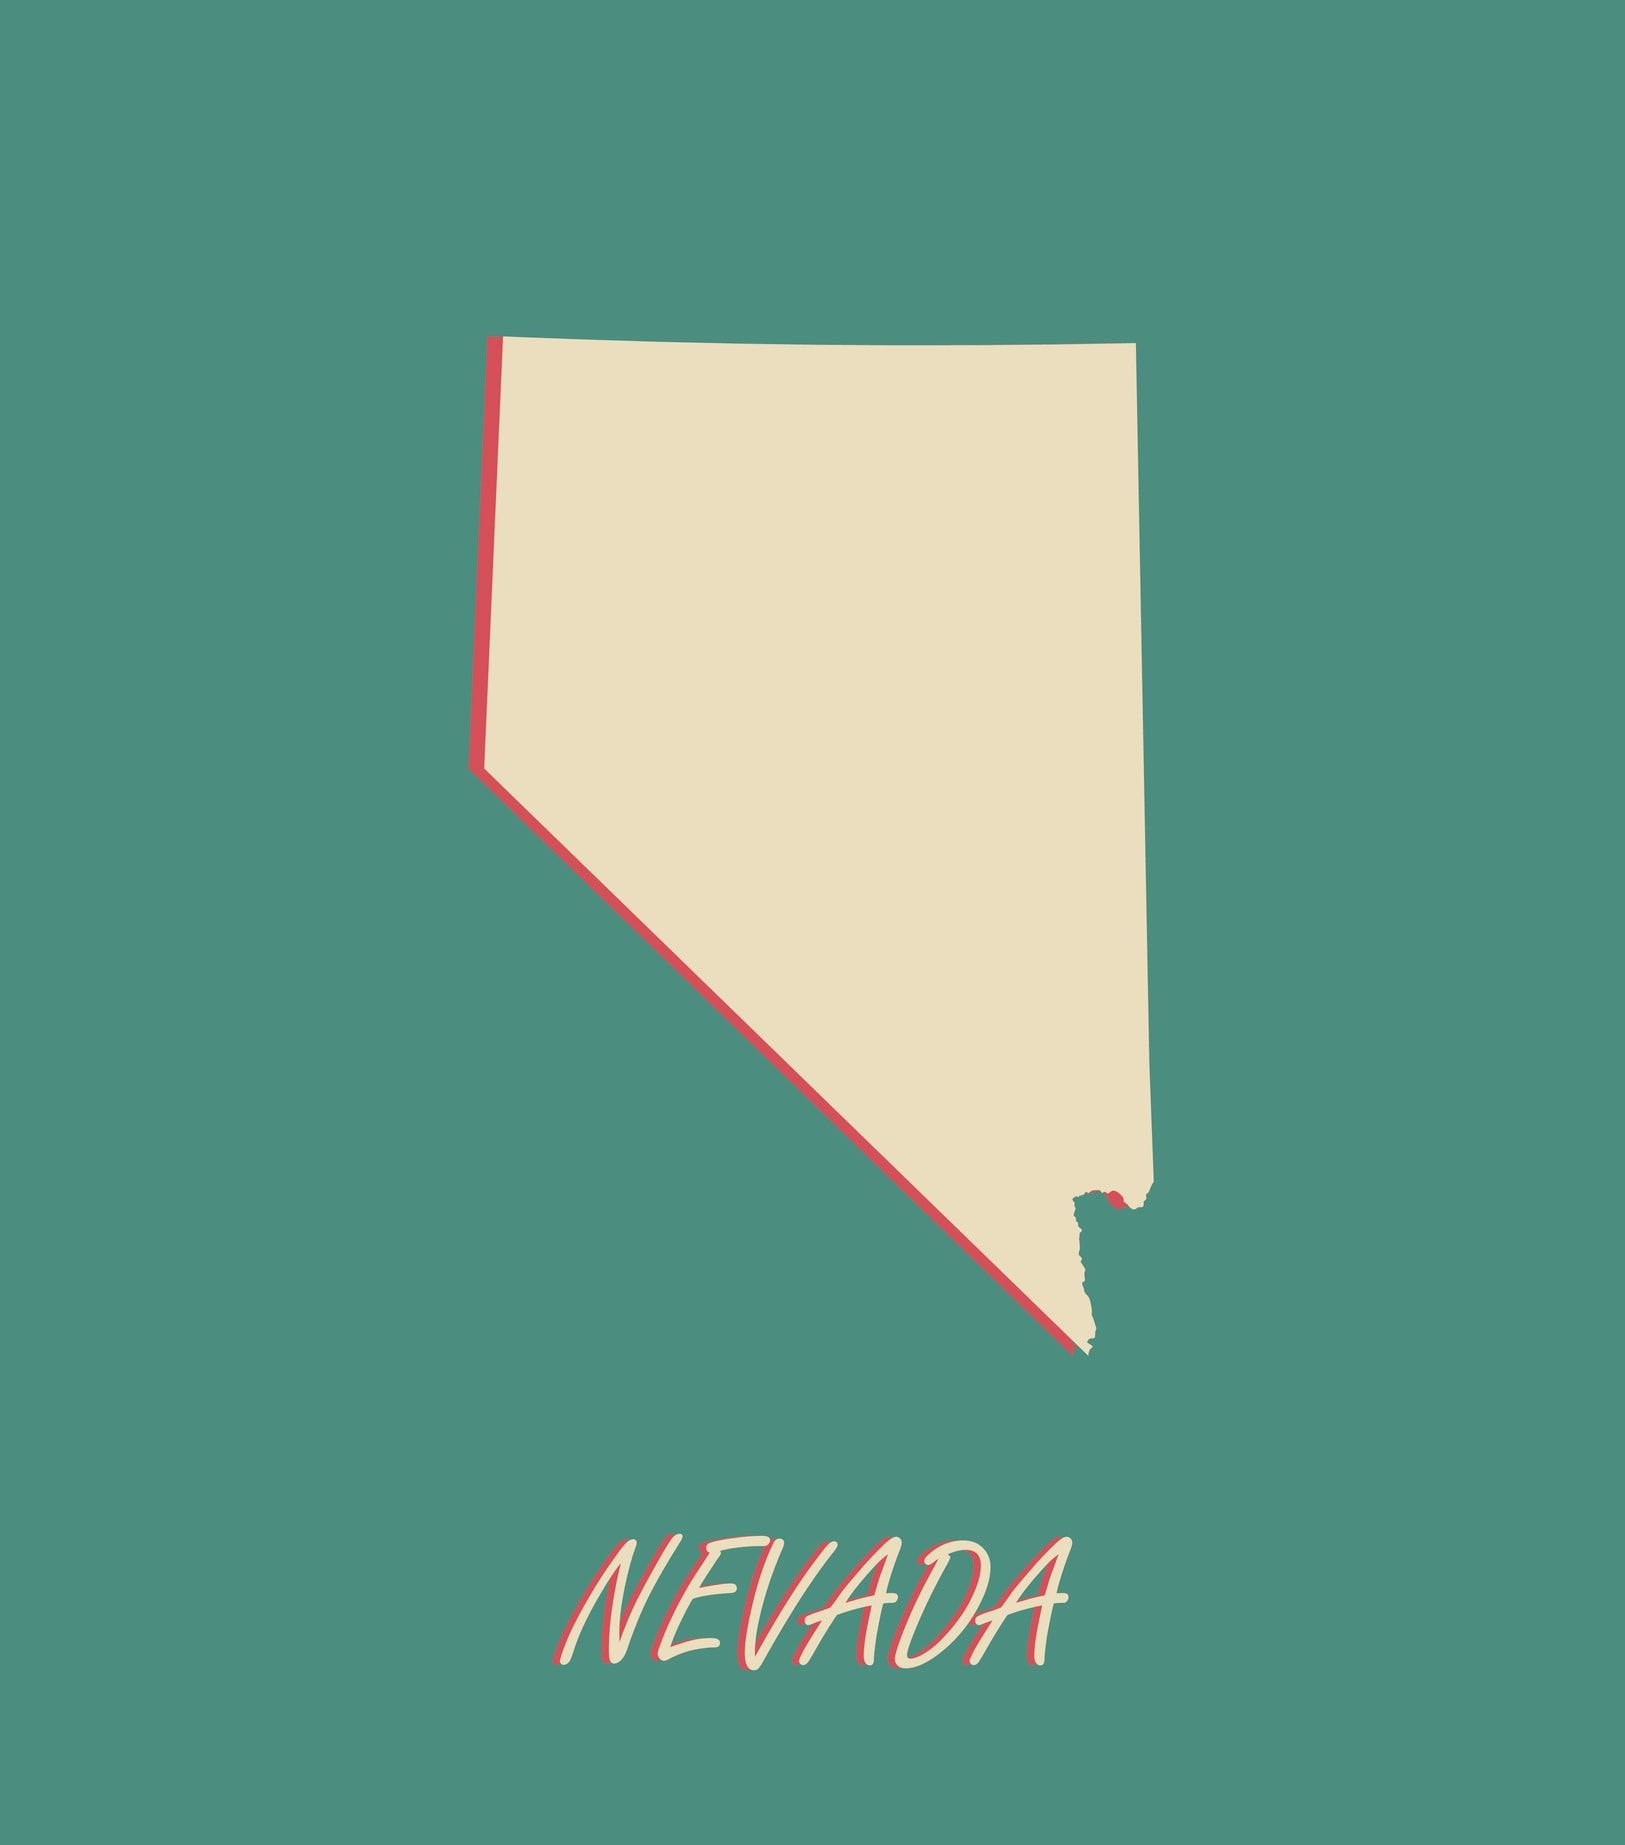 Nevada household employment tax and labor law guide